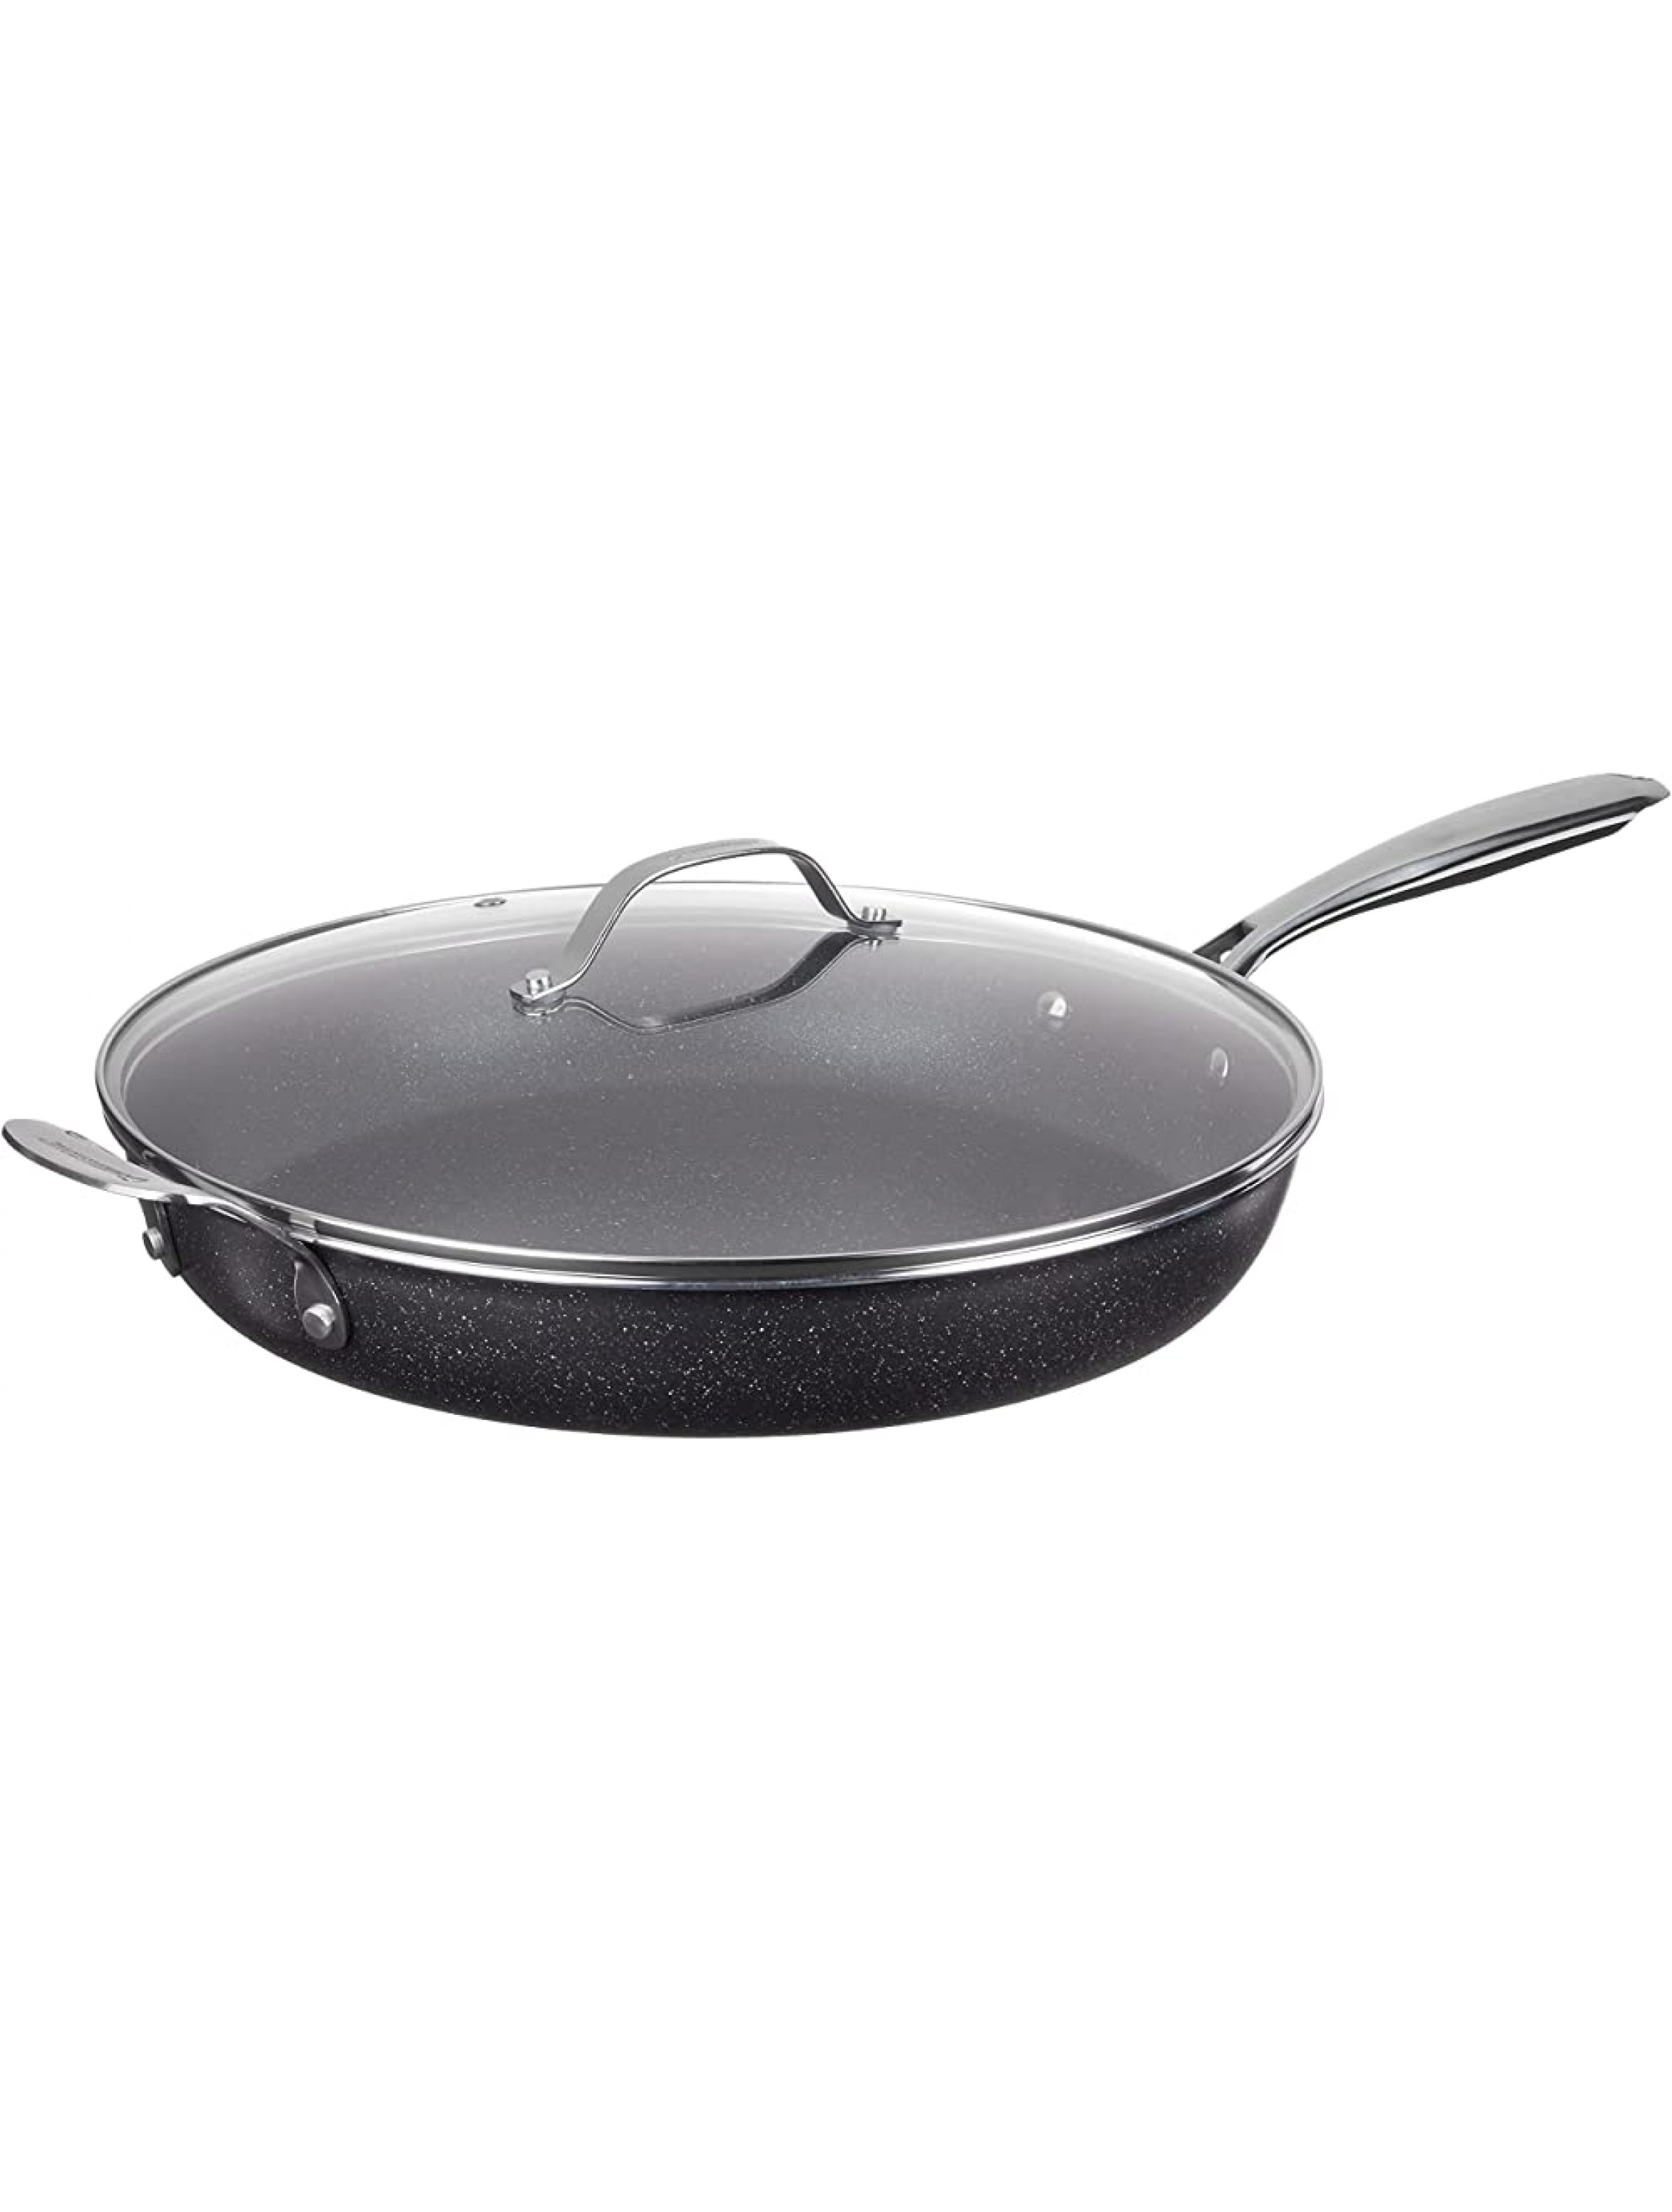 Granitestone Nonstick 14” Frying Pan with Lid Ultra Durable Mineral and Diamond Triple Coated Surface Family Sized Open Skillet Oven and Dishwasher Safe Large Black - BKC4A5FNE